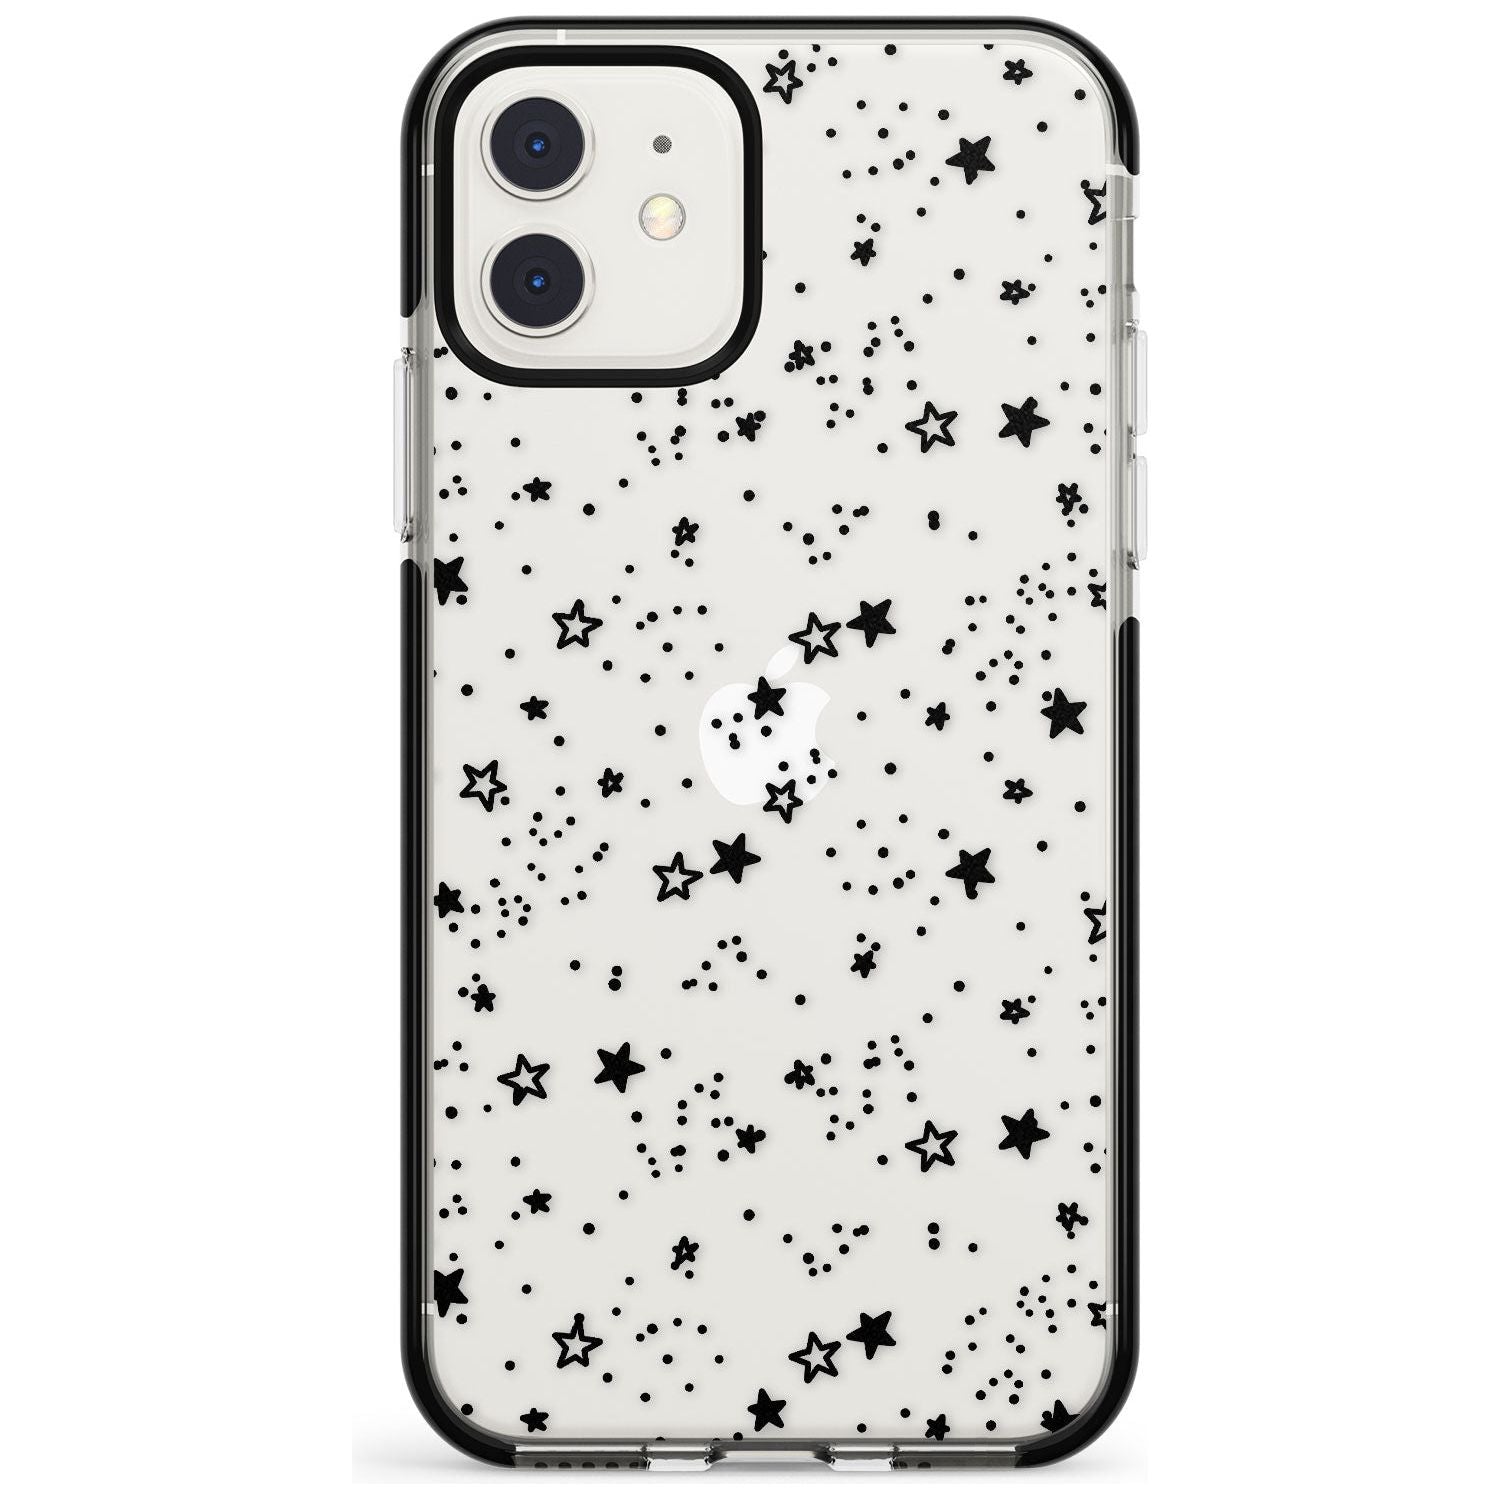 Mixed Stars Black Impact Phone Case for iPhone 11